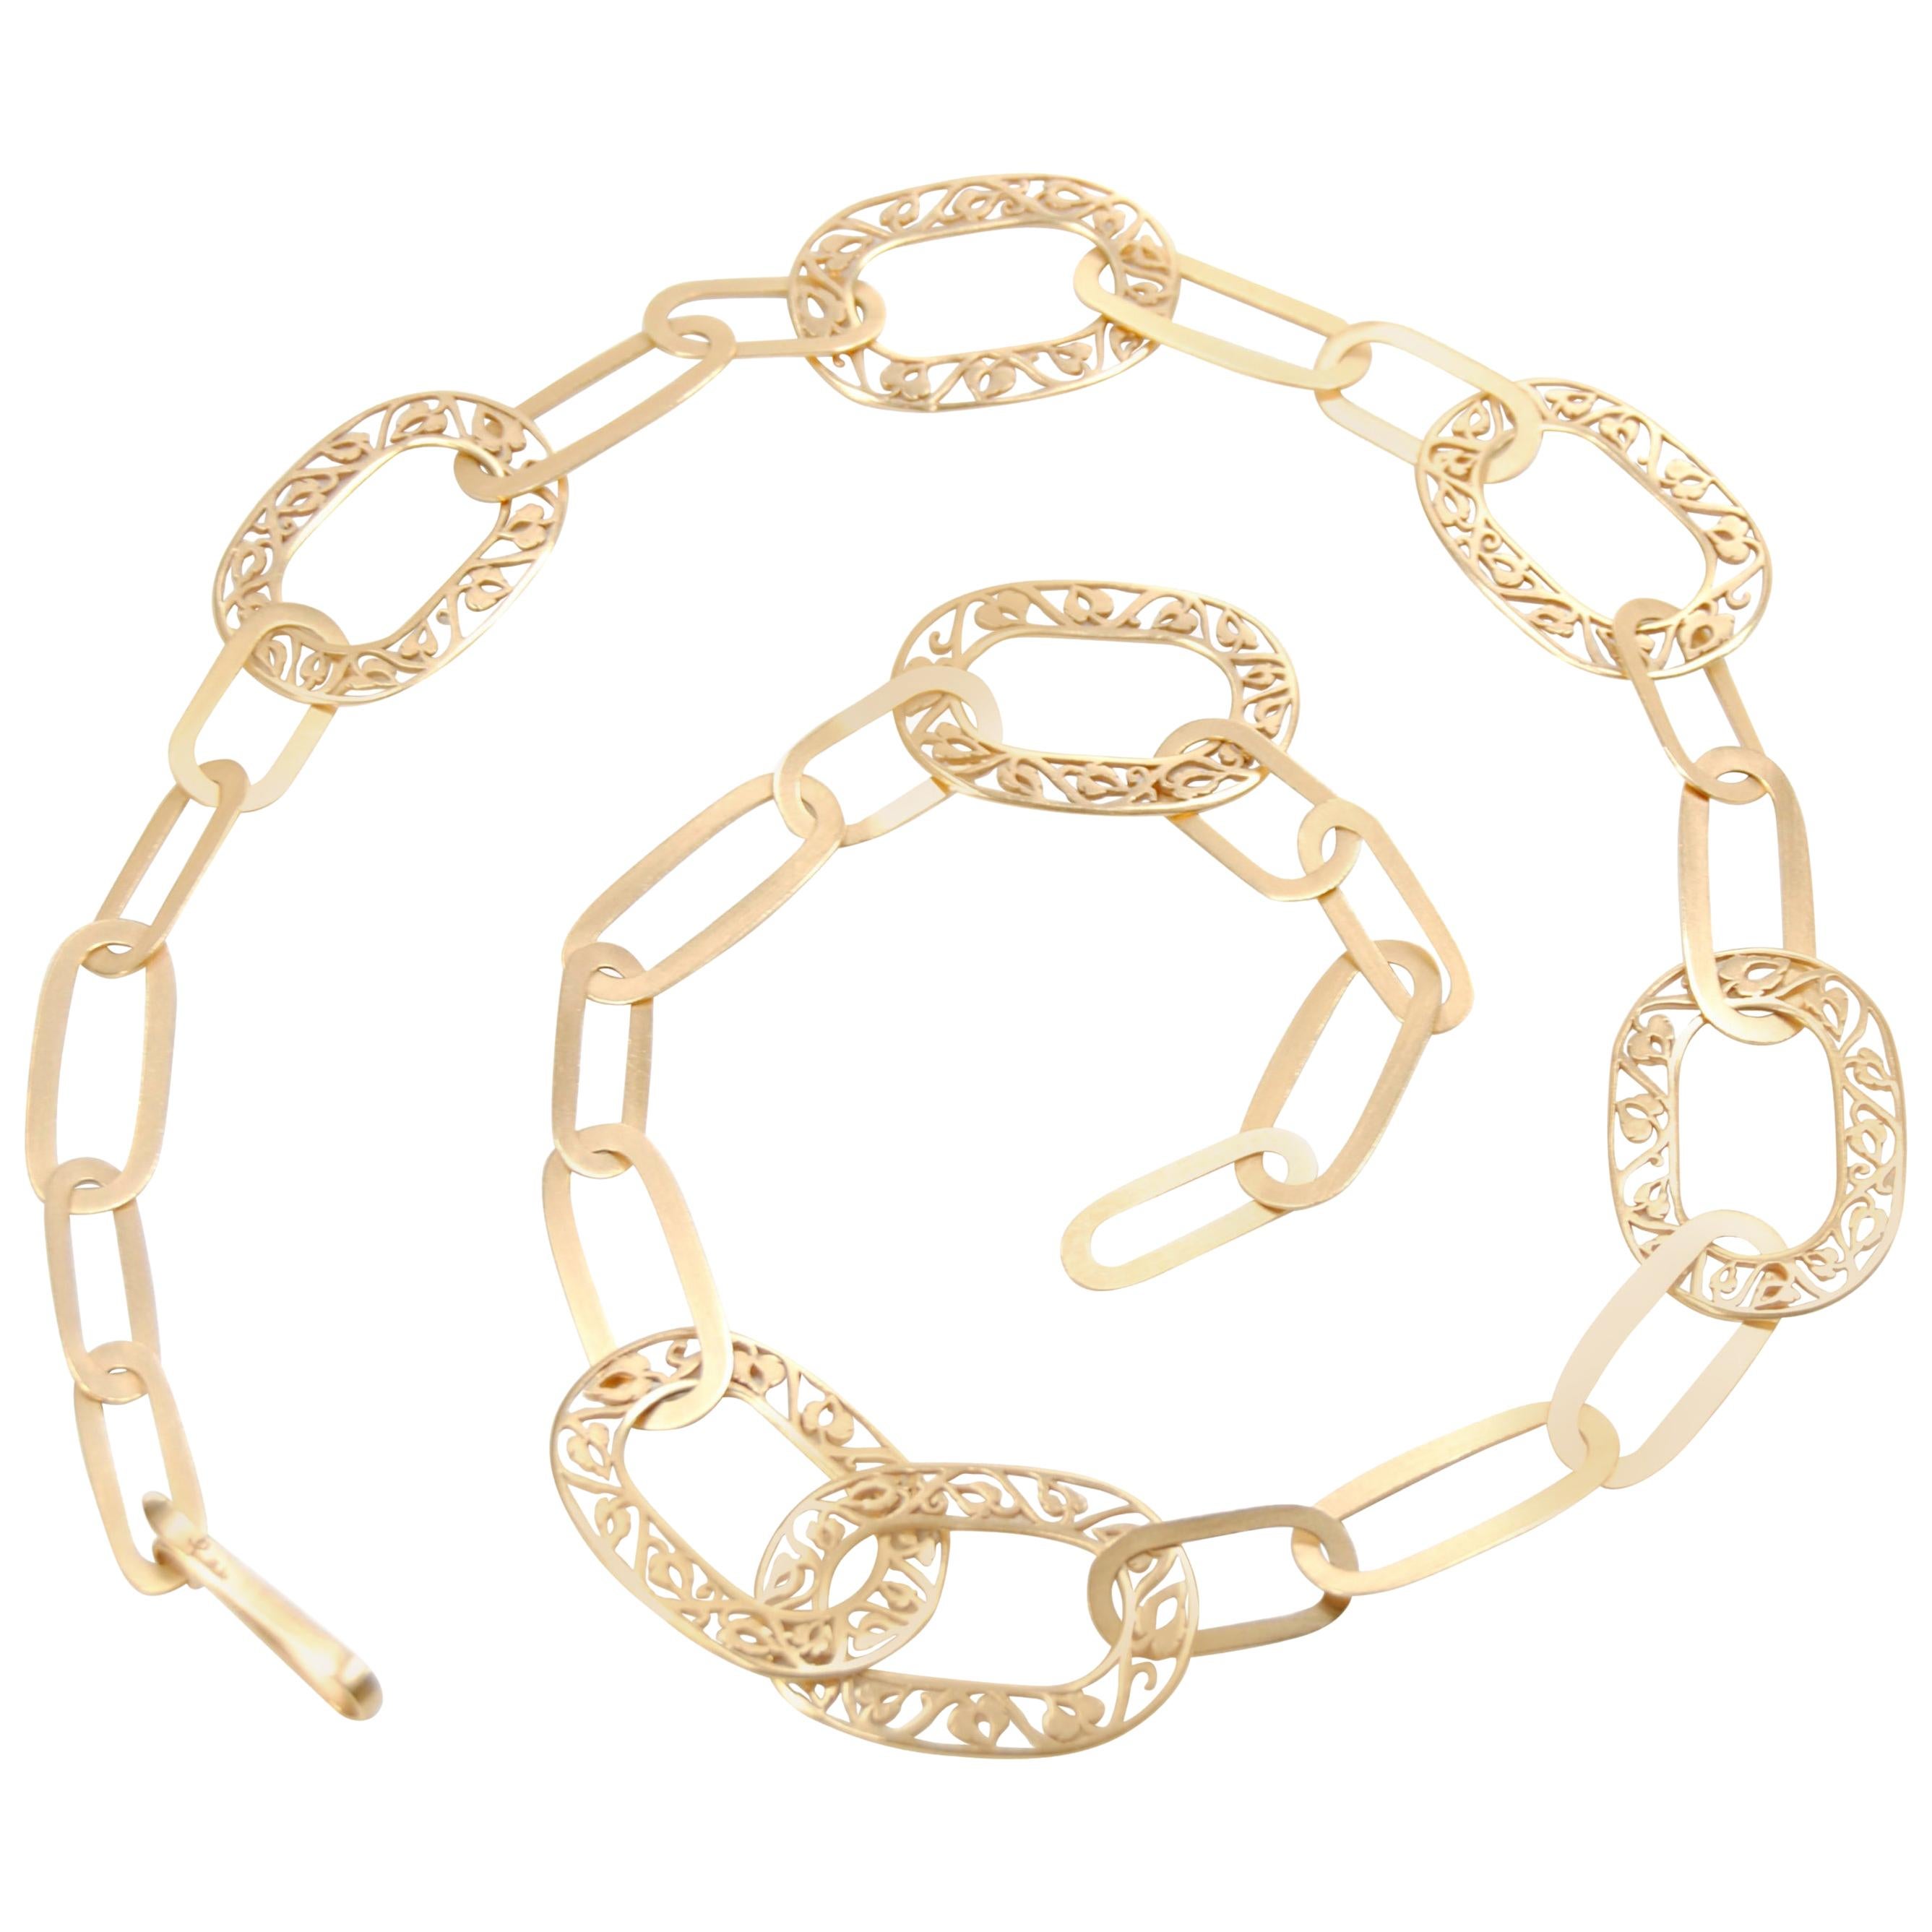 Pomellato Satin Gold Necklace from Arabesque Collection